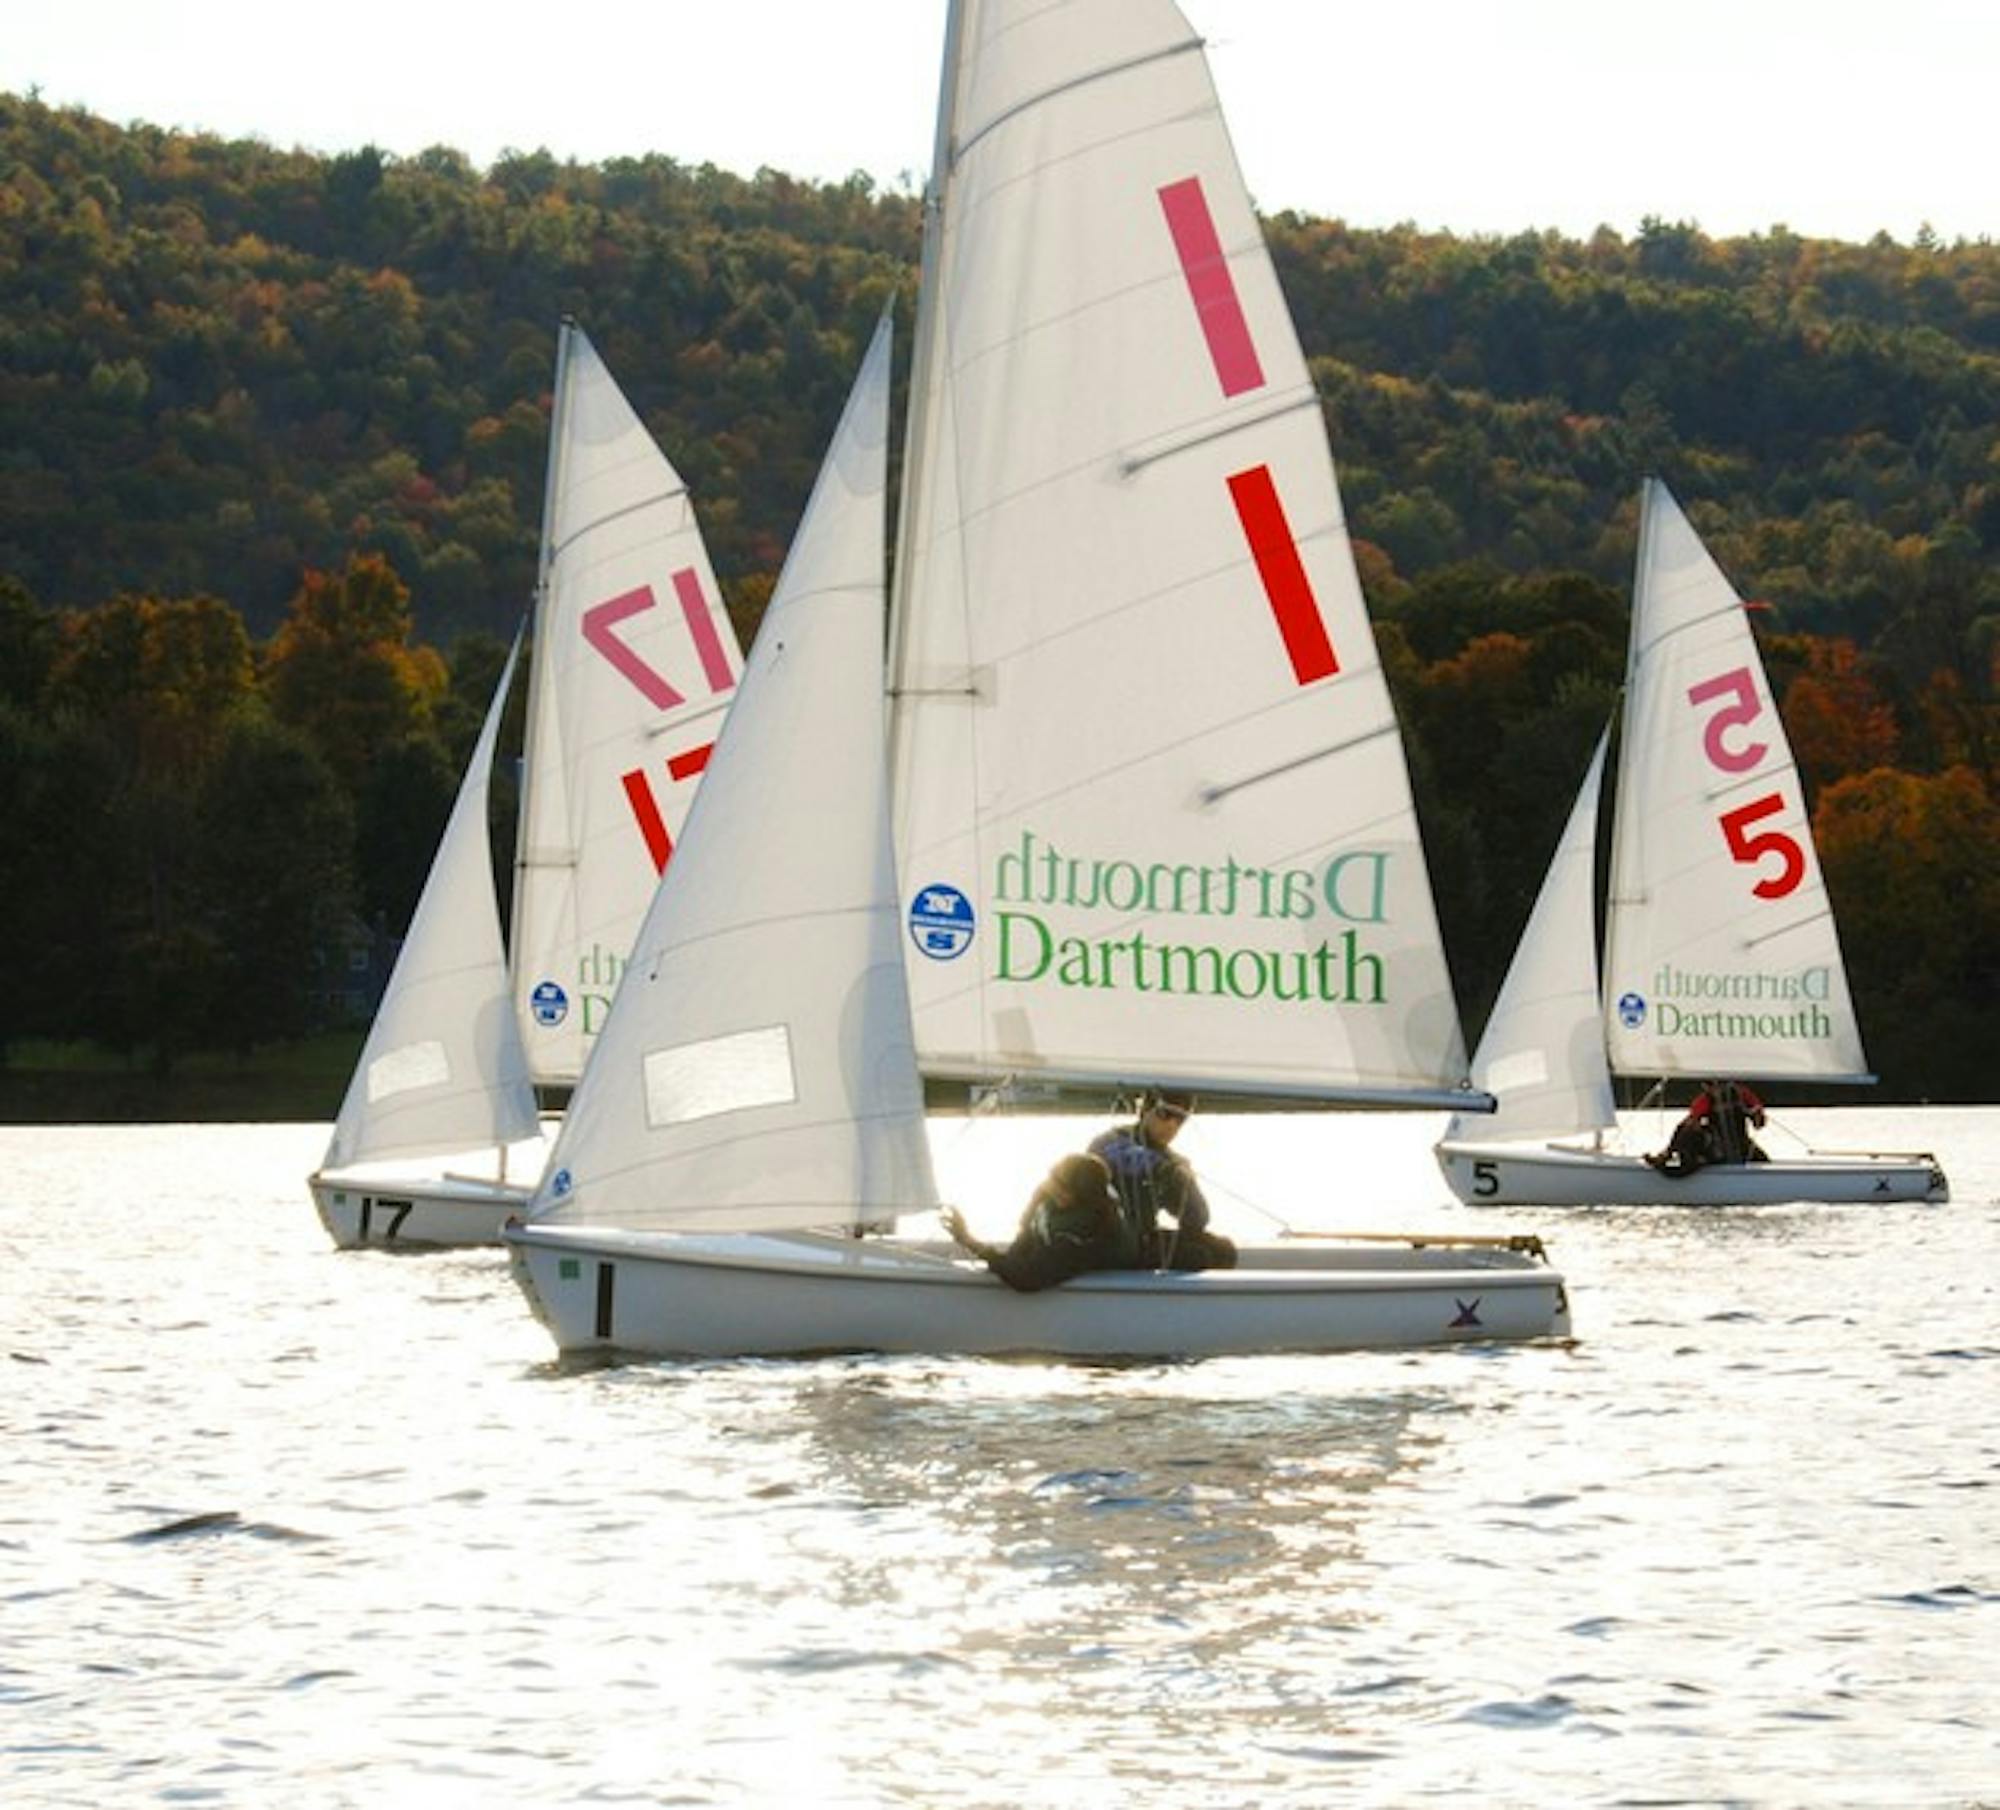 Favorable practicing conditions at Lake Mascoma helped Dartmouth women's sailing prepare for a second-place finish overall at the Regis Bowl.